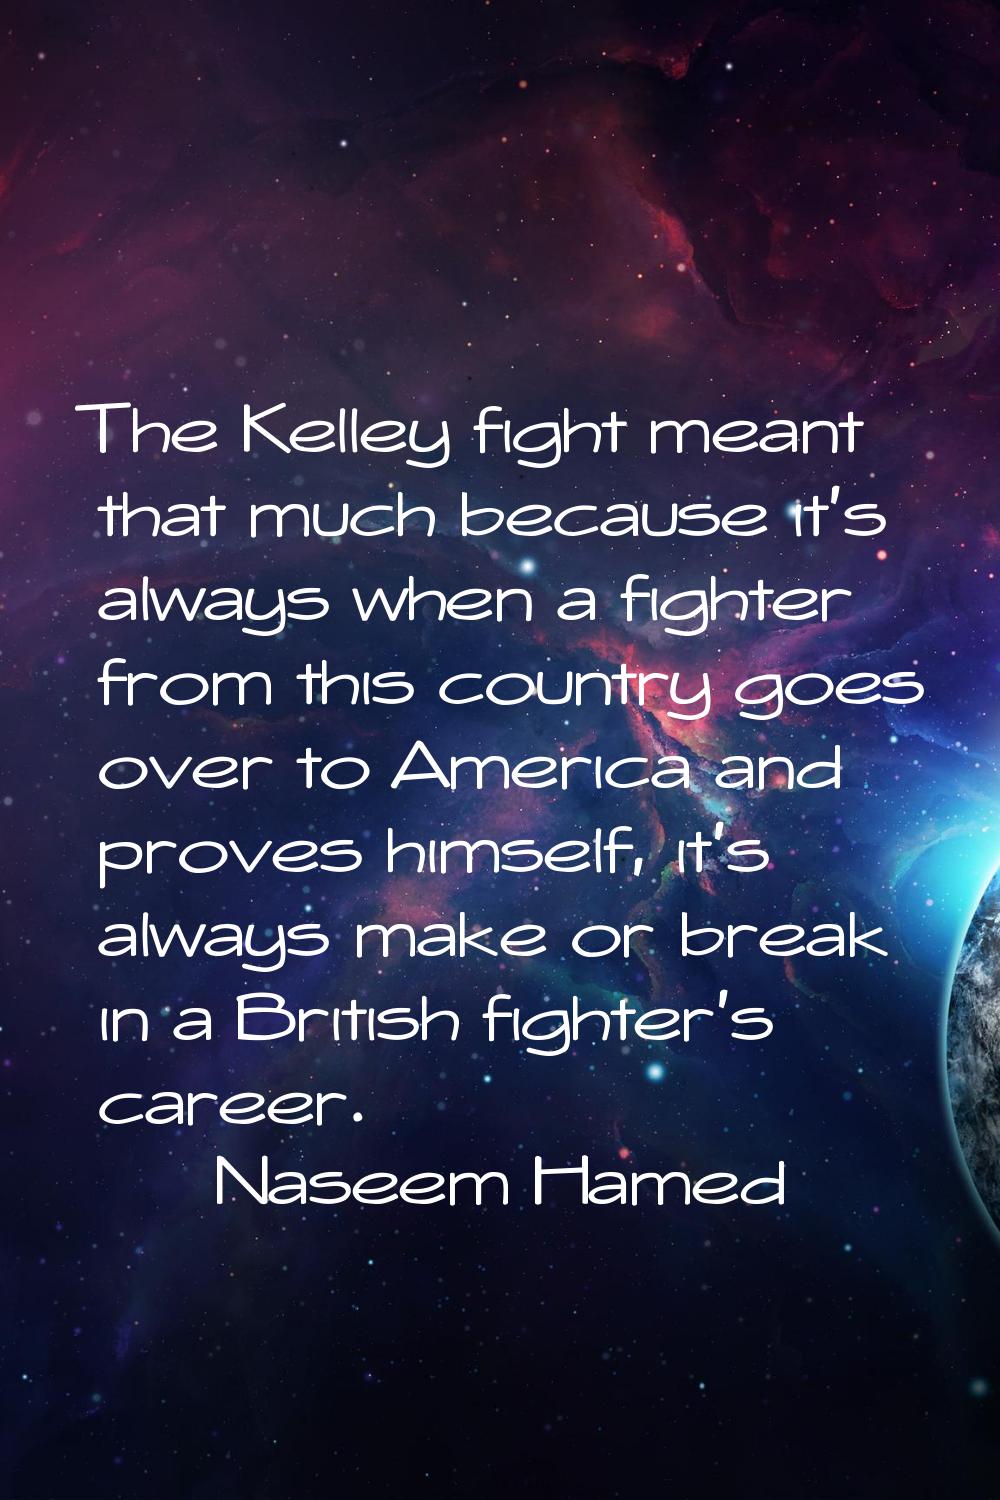 The Kelley fight meant that much because it's always when a fighter from this country goes over to 